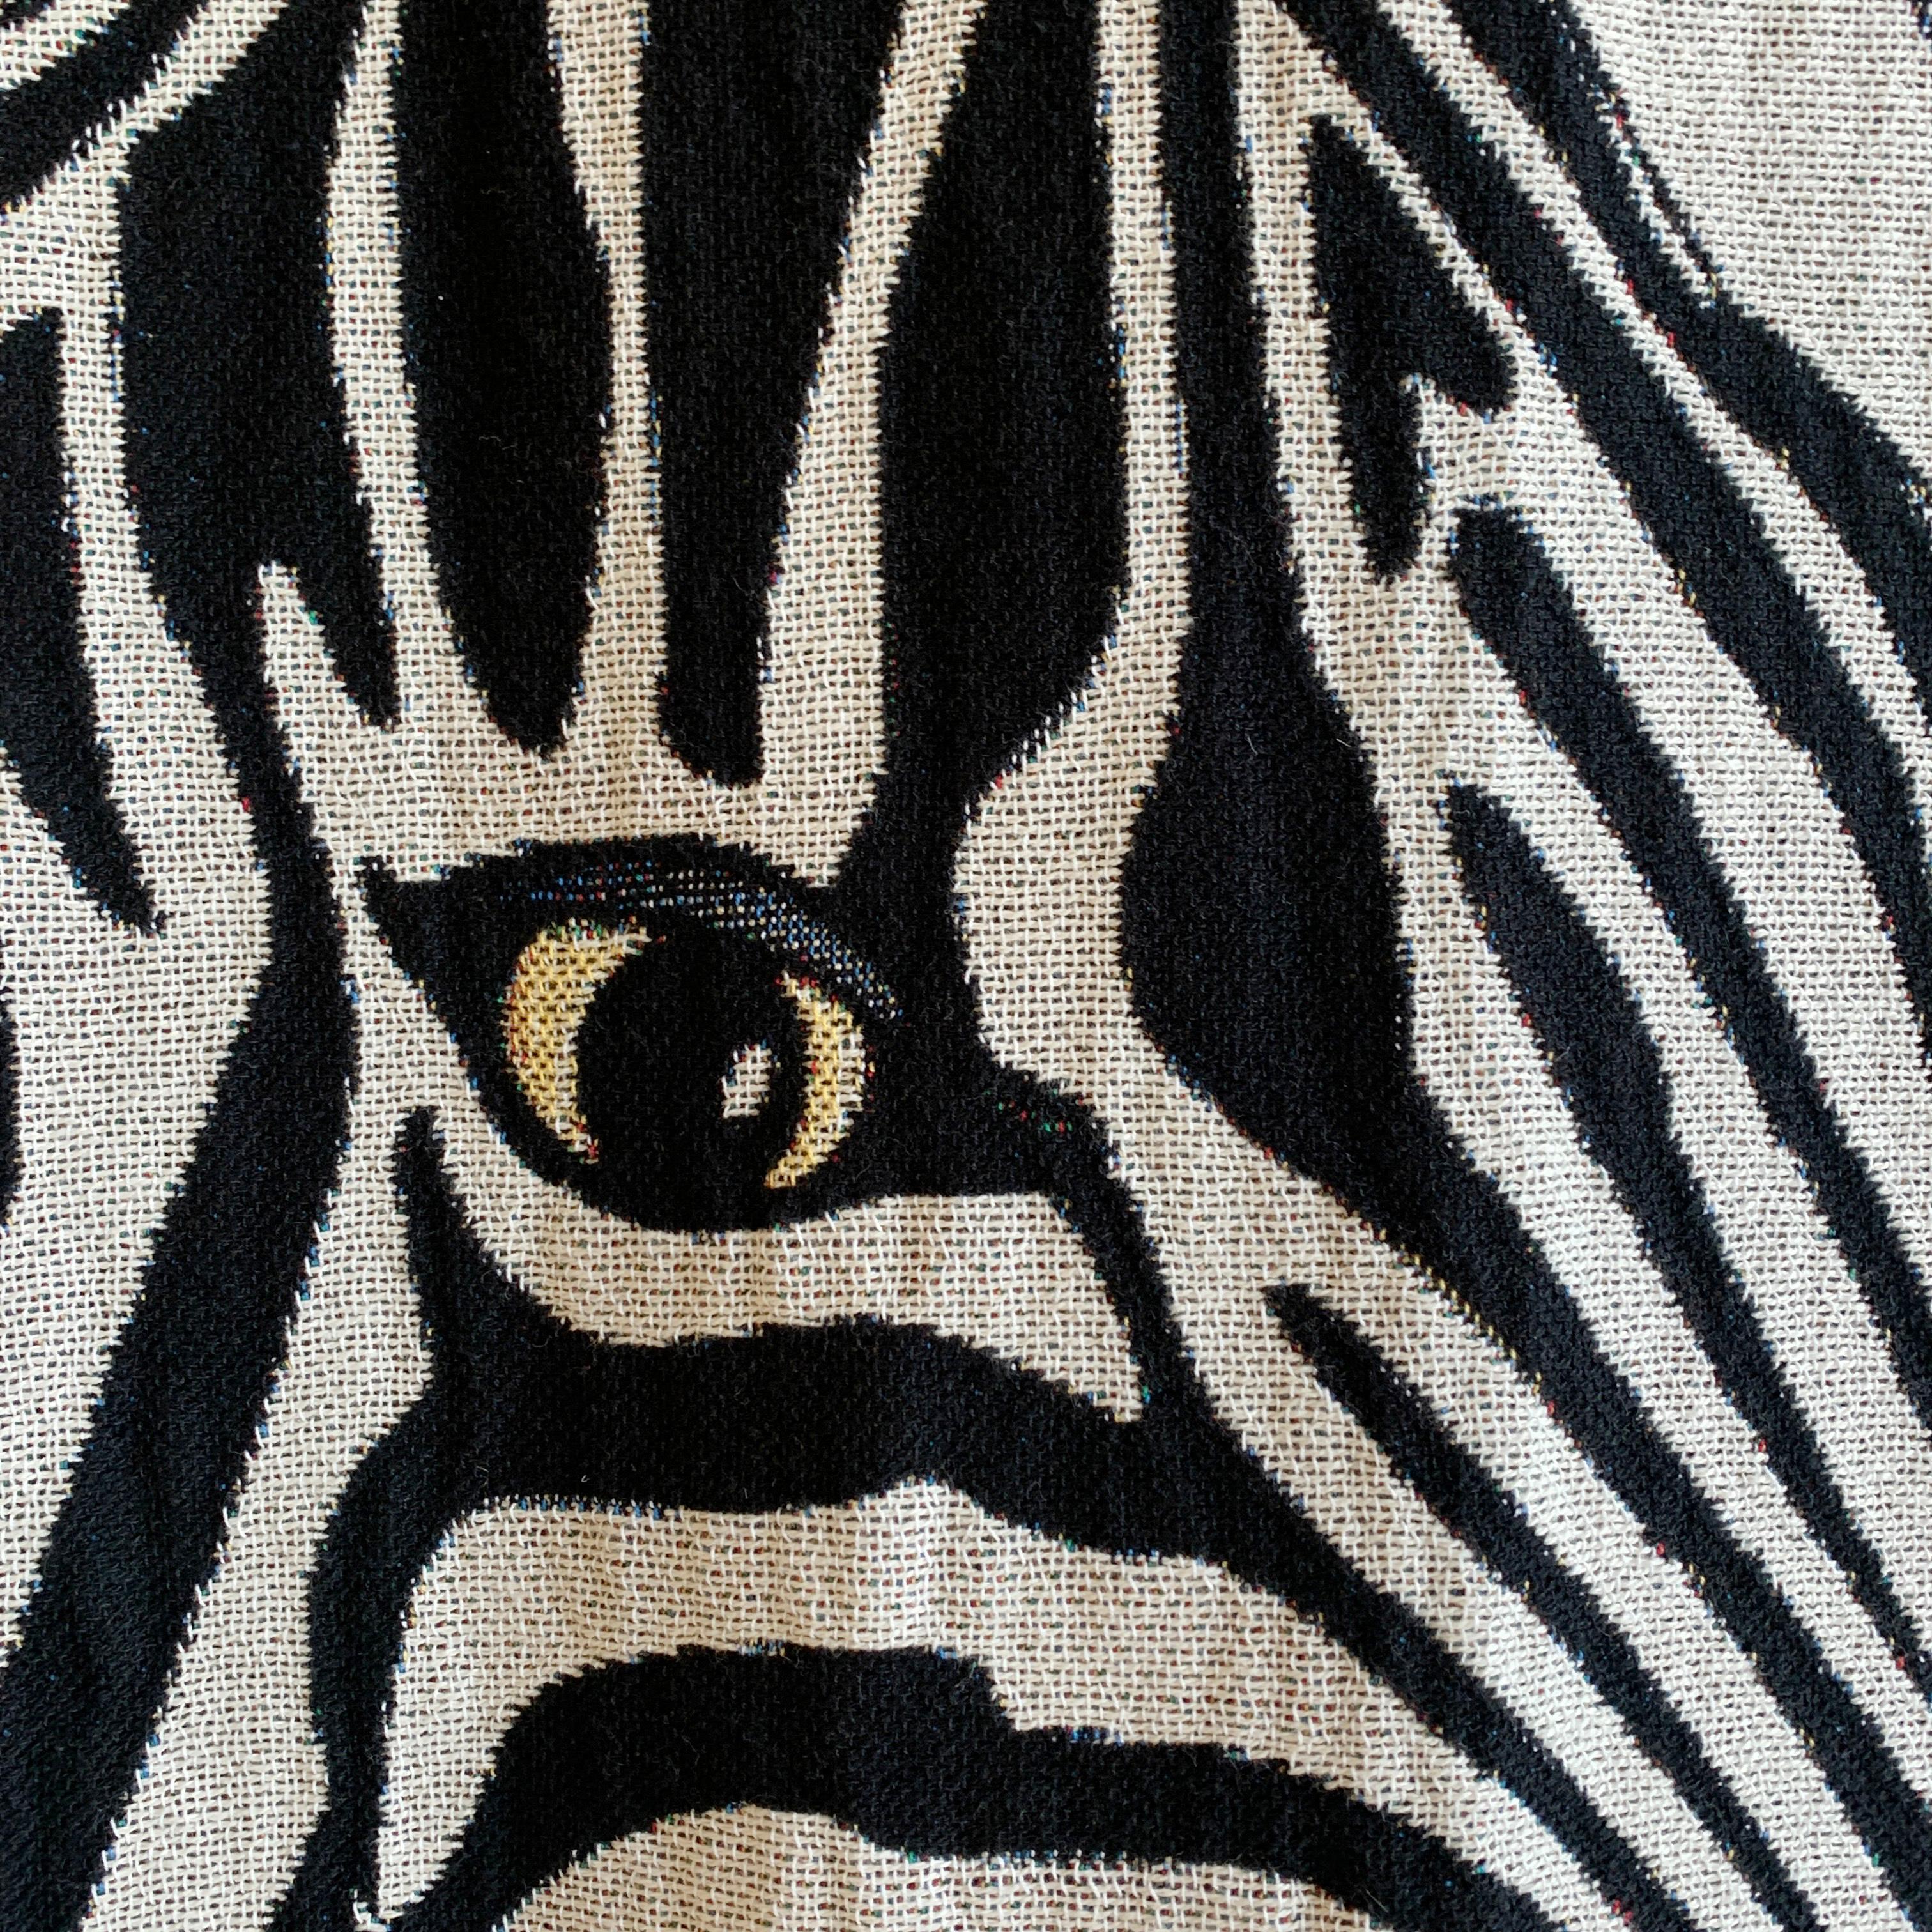 English The Tropics Collection 'Zebra' Woven Throw Monochrome and Gold For Sale